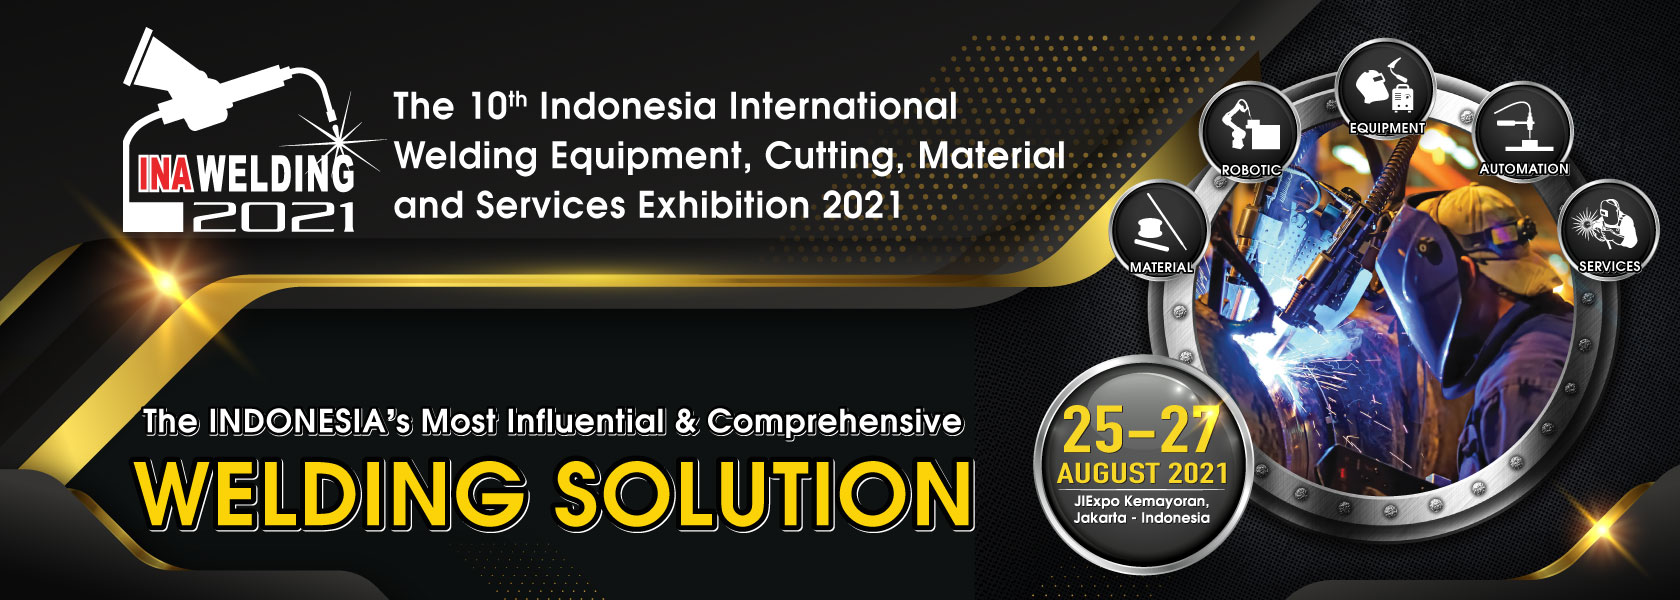 Indonesia International Welding Equipment and Cutting Material & Services Exhibition